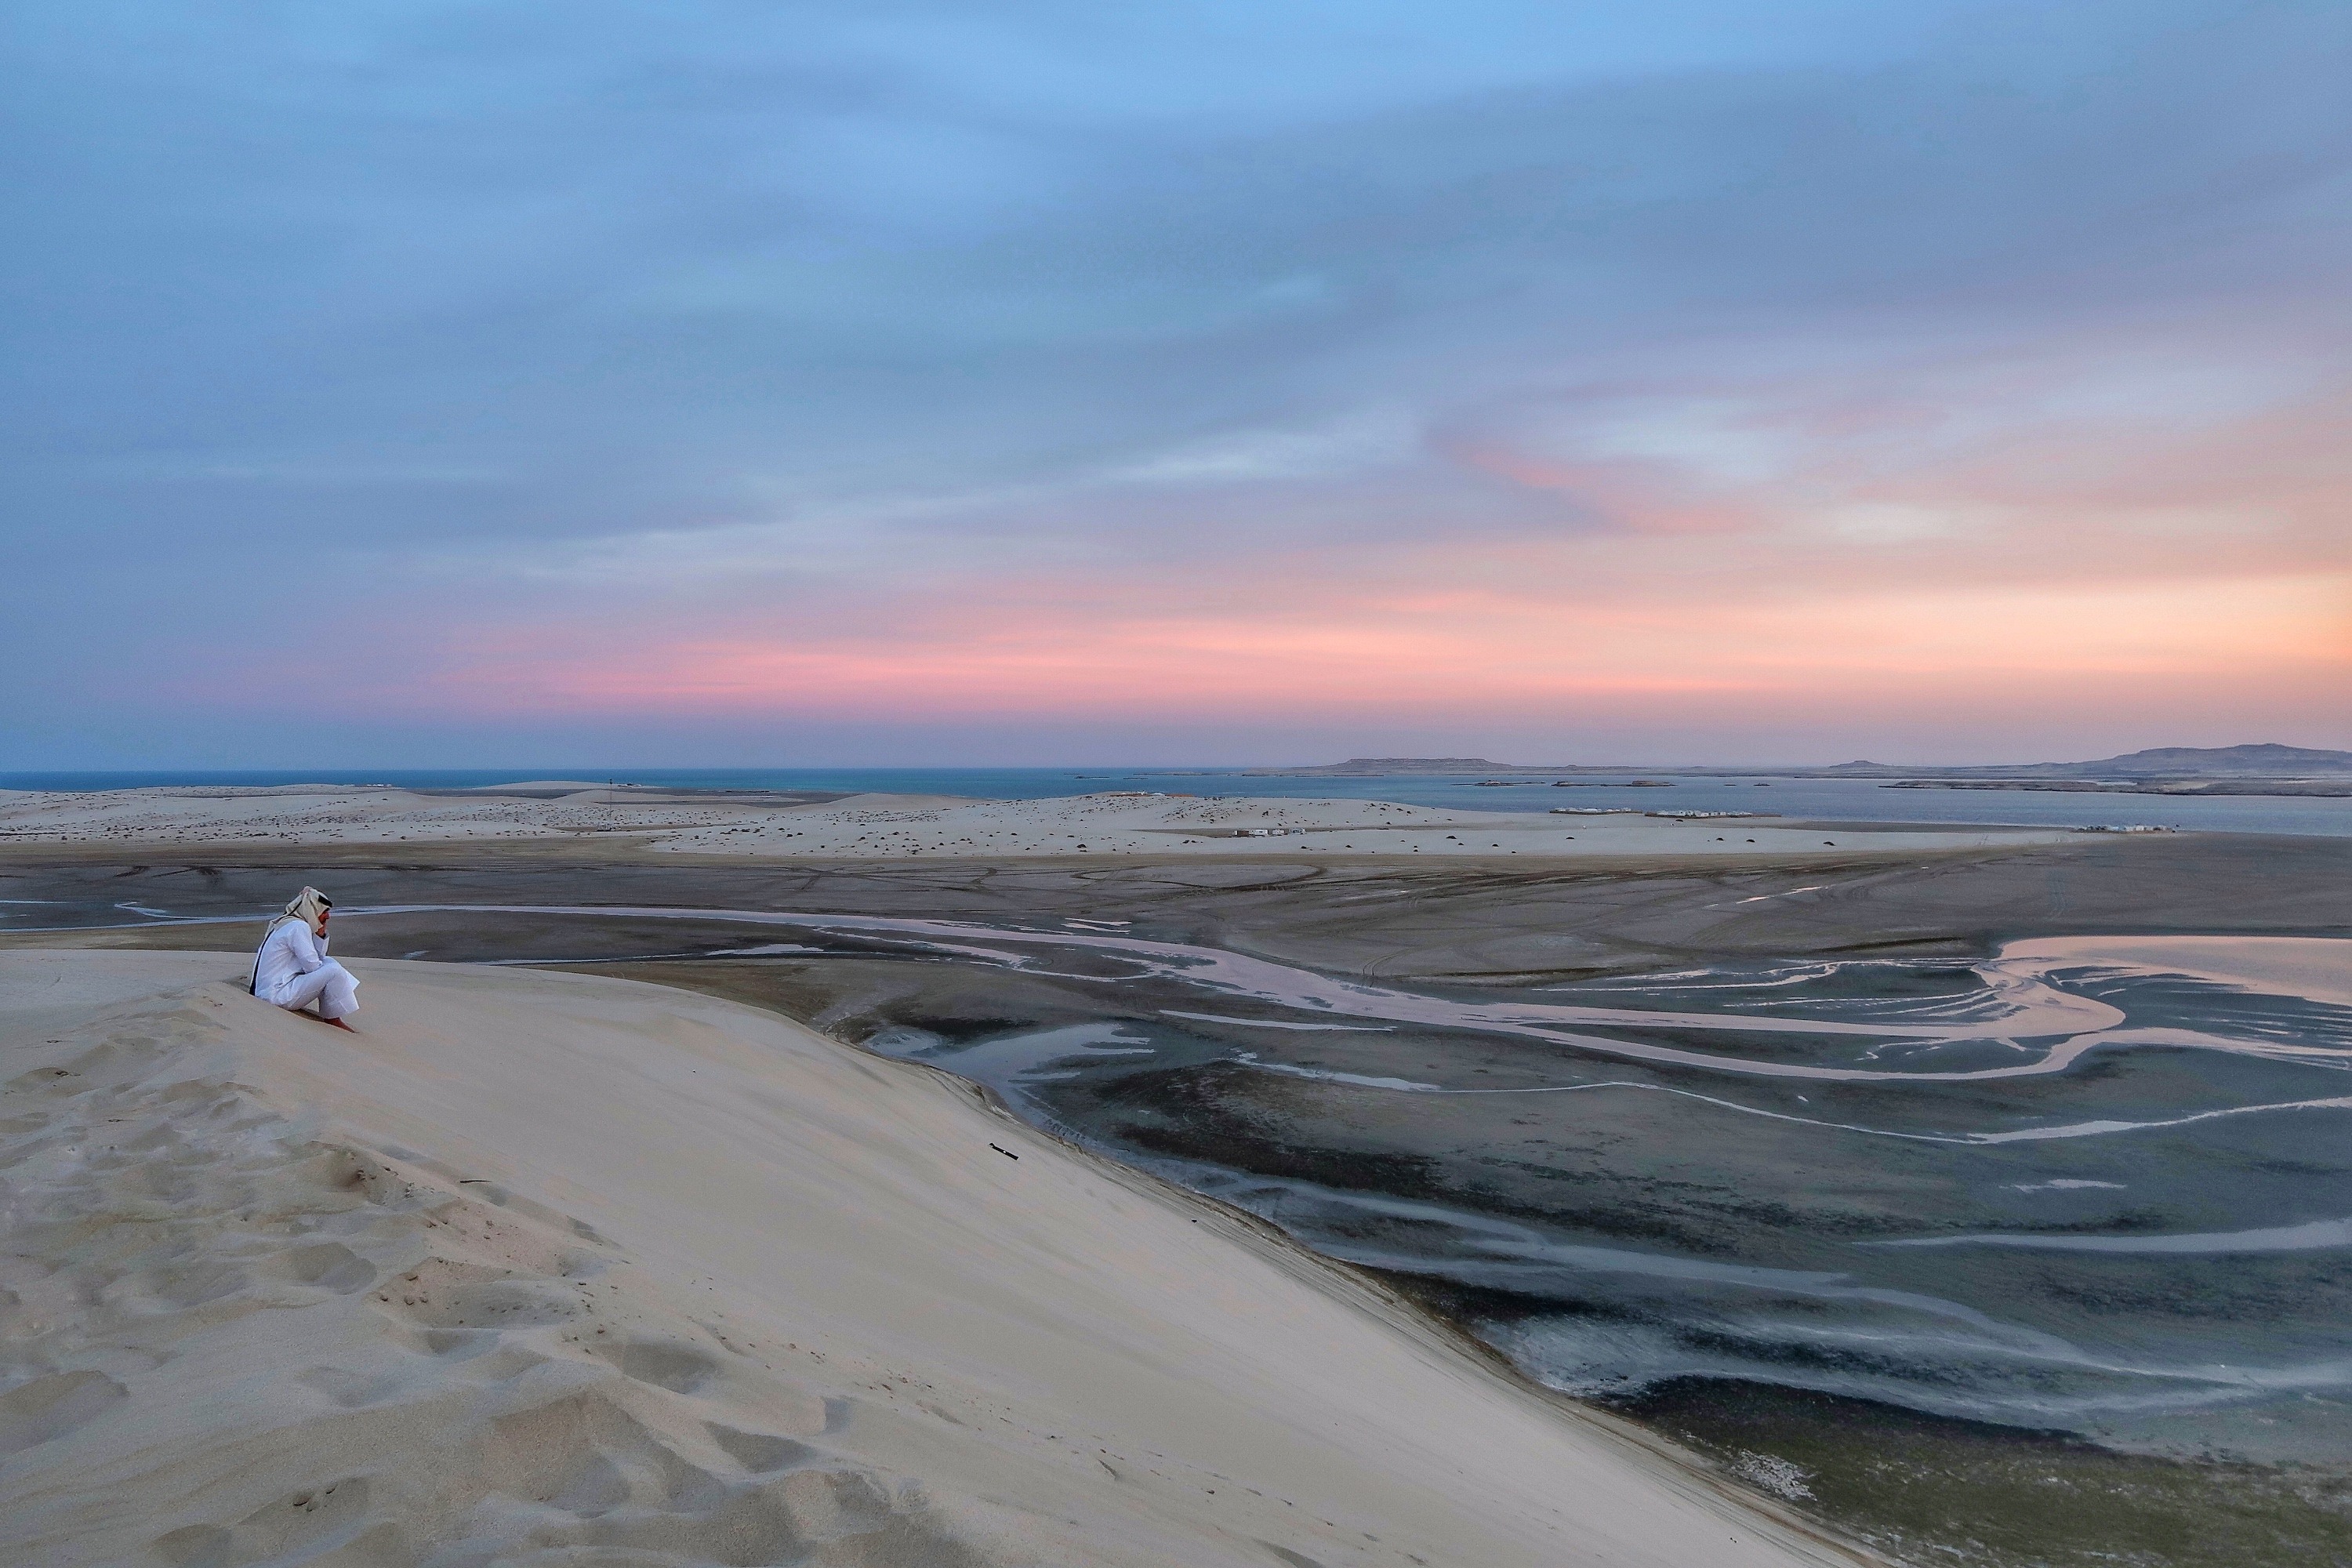 Desert Sunset over Doha and Saudi Arabia | Visit Qatar | Doha, the capital of Qatar is located in the Middle East and the World Cup 2022 location. Find out how I spent 4 days on my visit to Qatar | Travel Guide & Tips | Elle Blonde Luxury Lifestyle Destination Blog